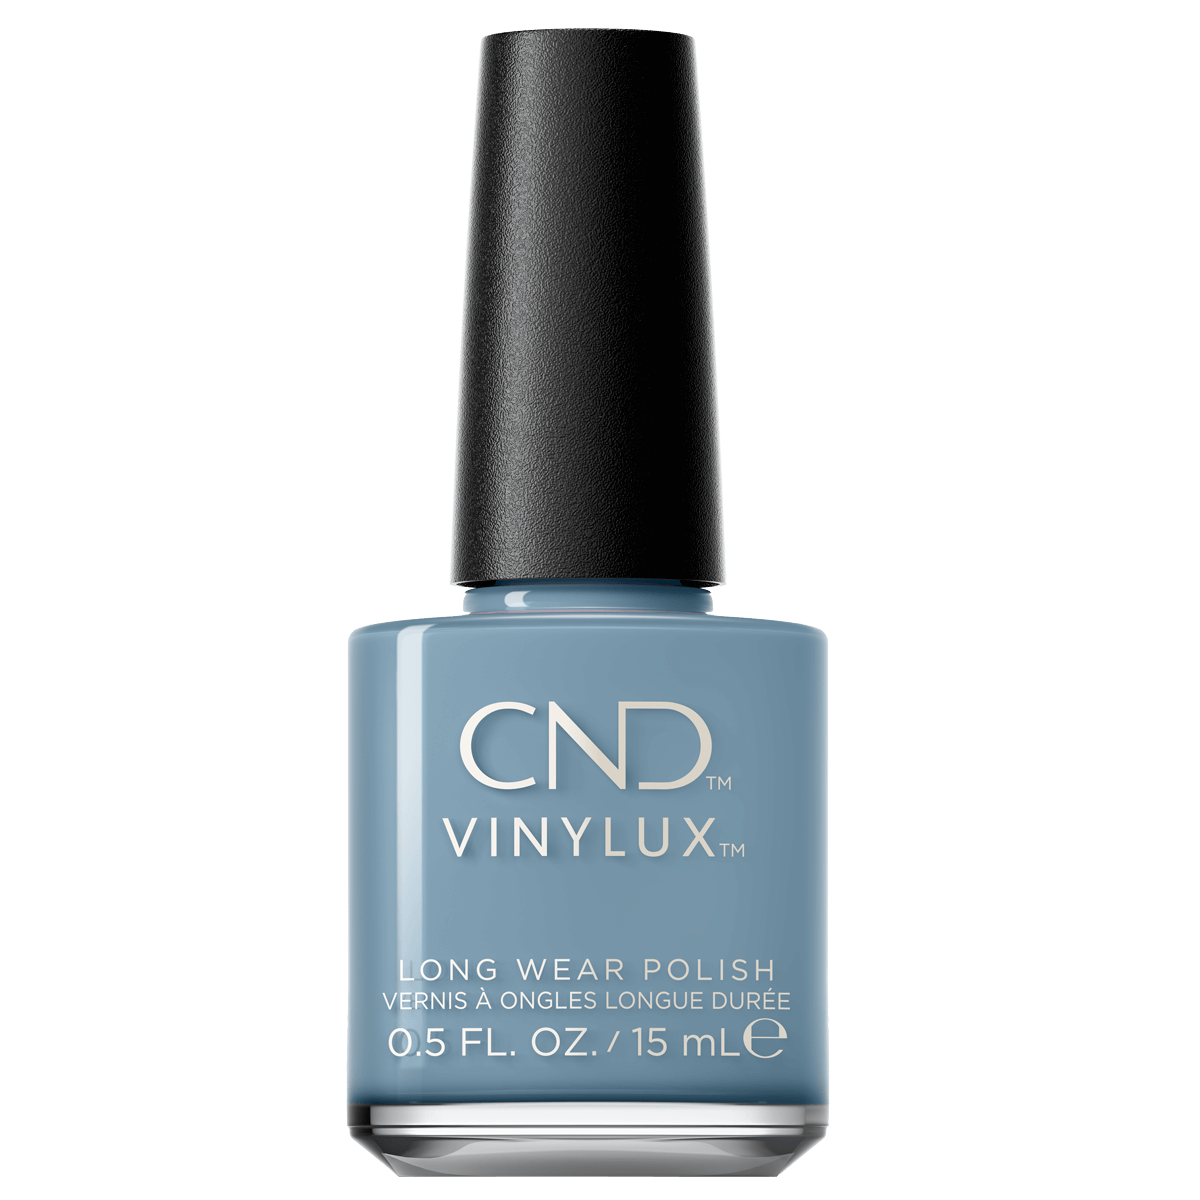 Vinylux CND Nail Polish #432 Frosted Seaglass 15mL